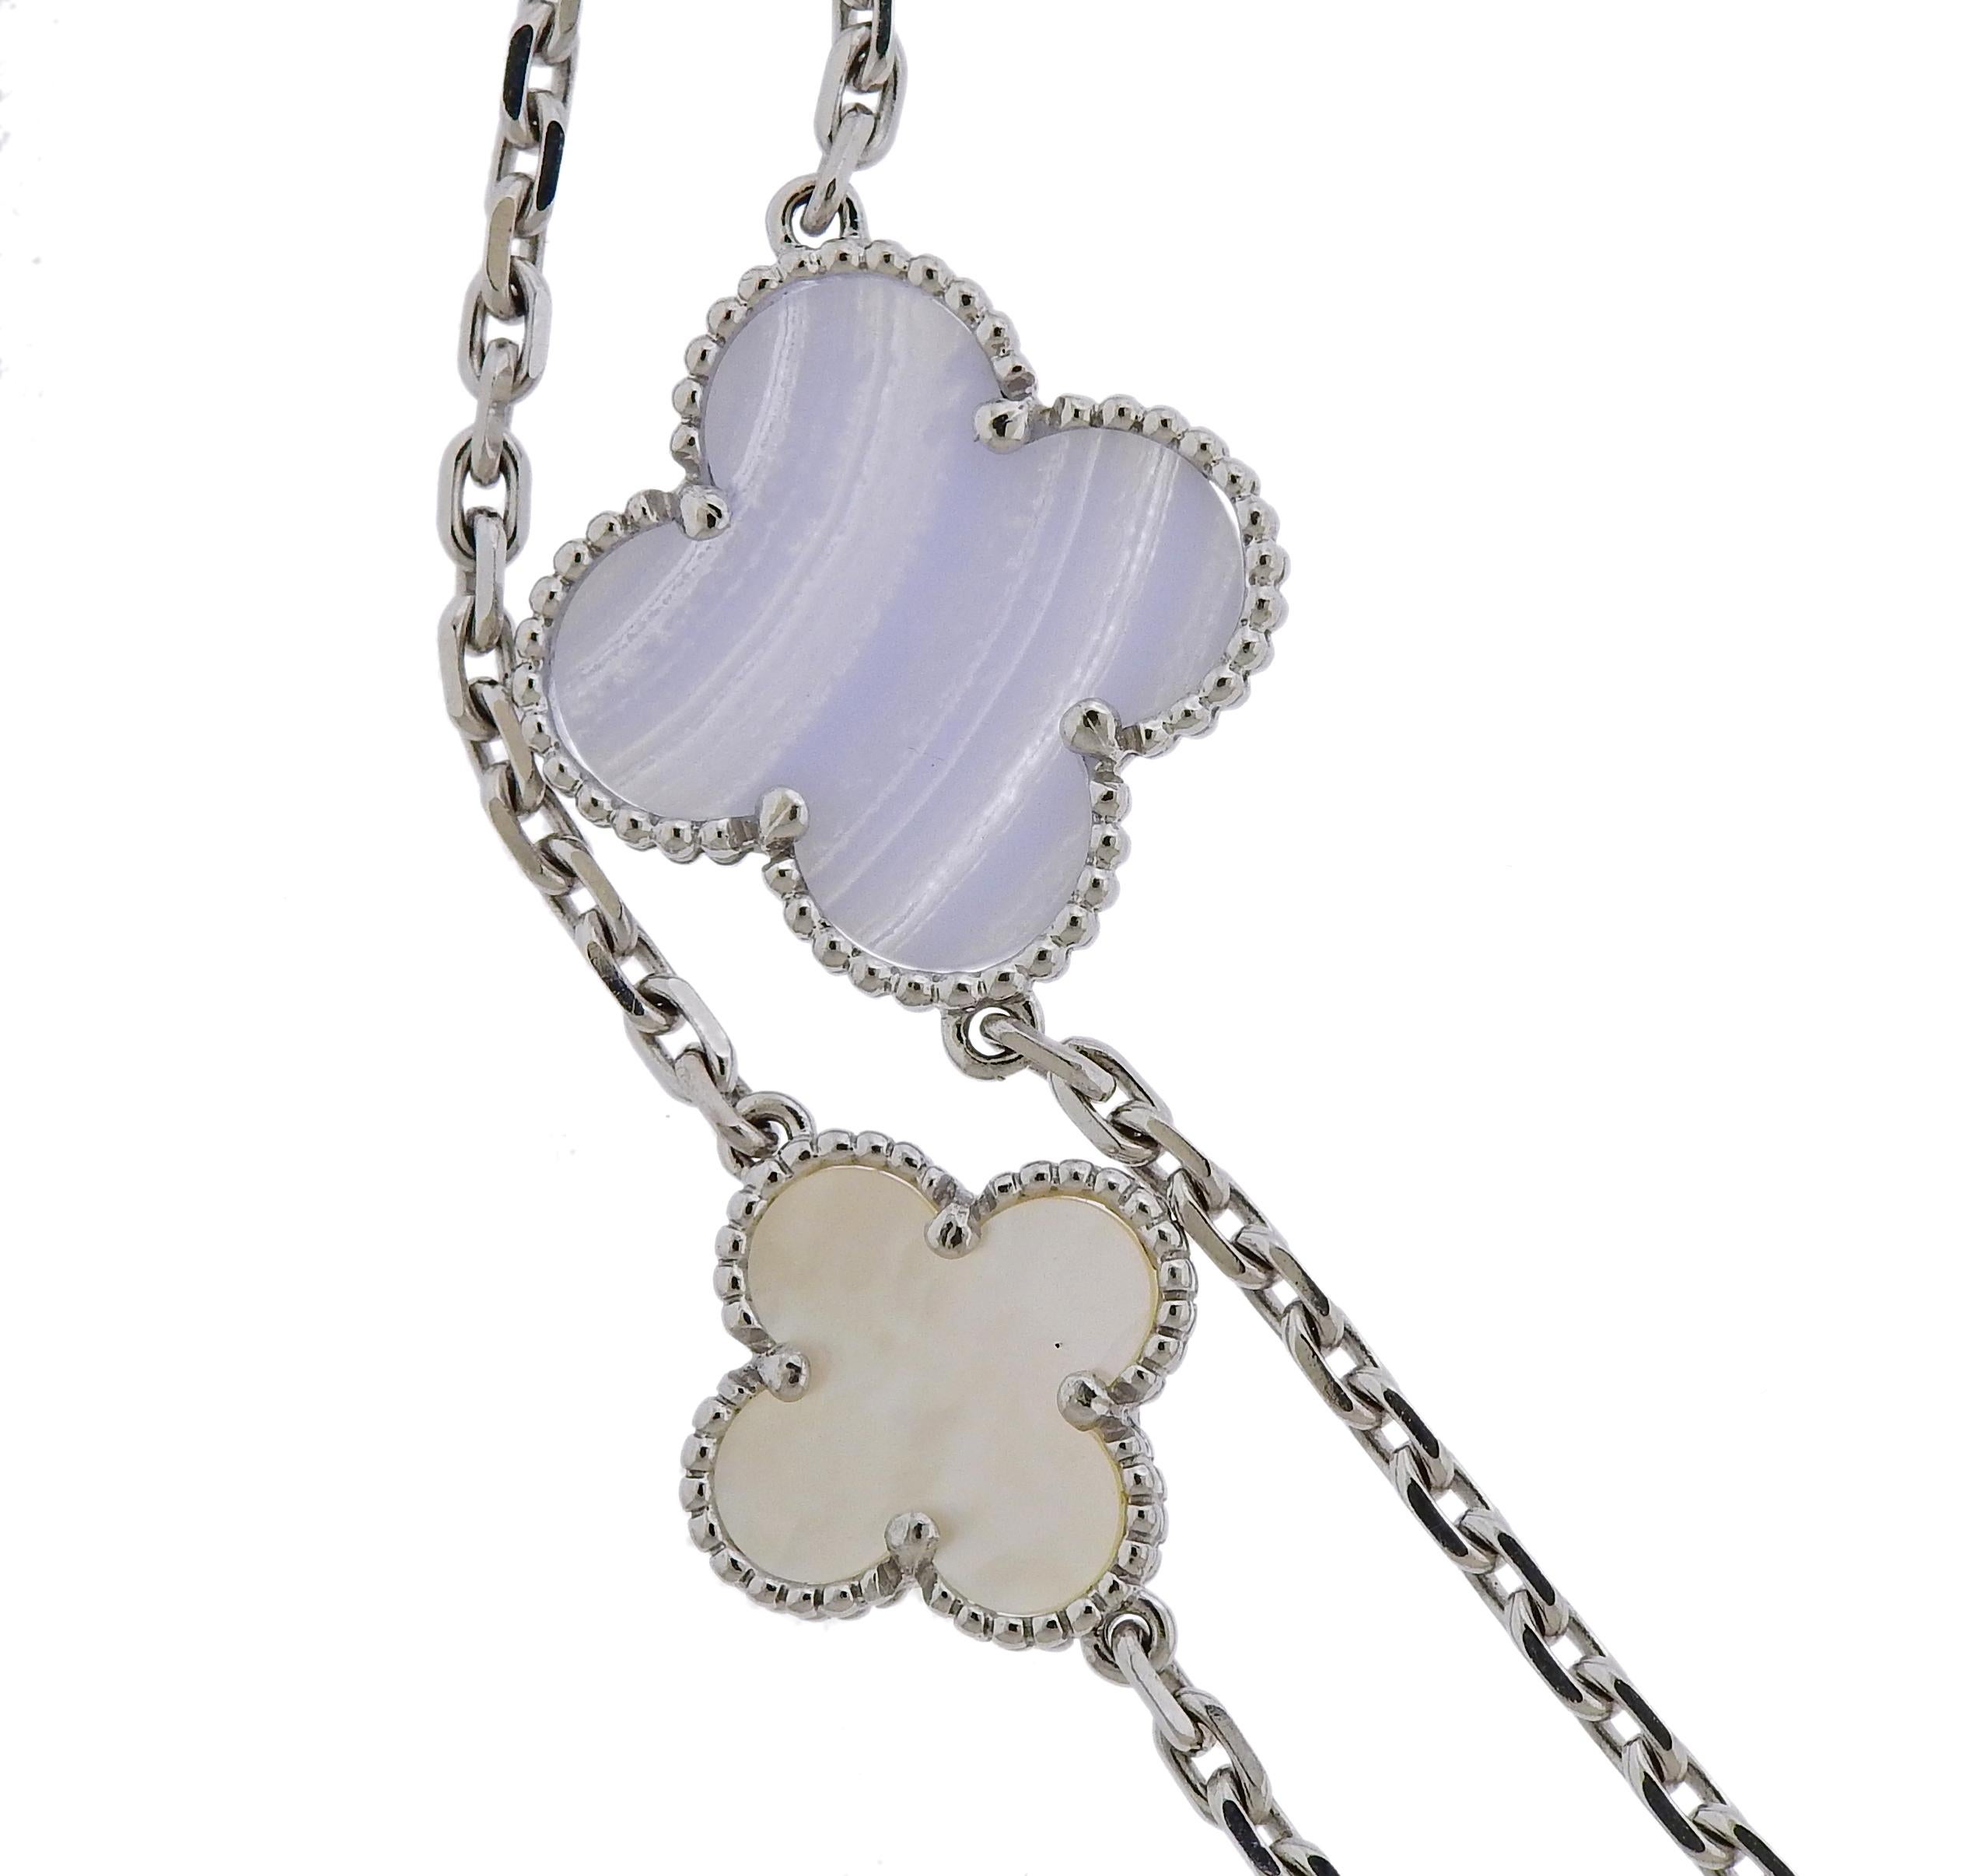 Long Magic Alhambra necklace by Van Cleef & Arpels, set with multi size clovers, set with mother of pearl and chalcedony, in 18k white gold. Necklace measures 48